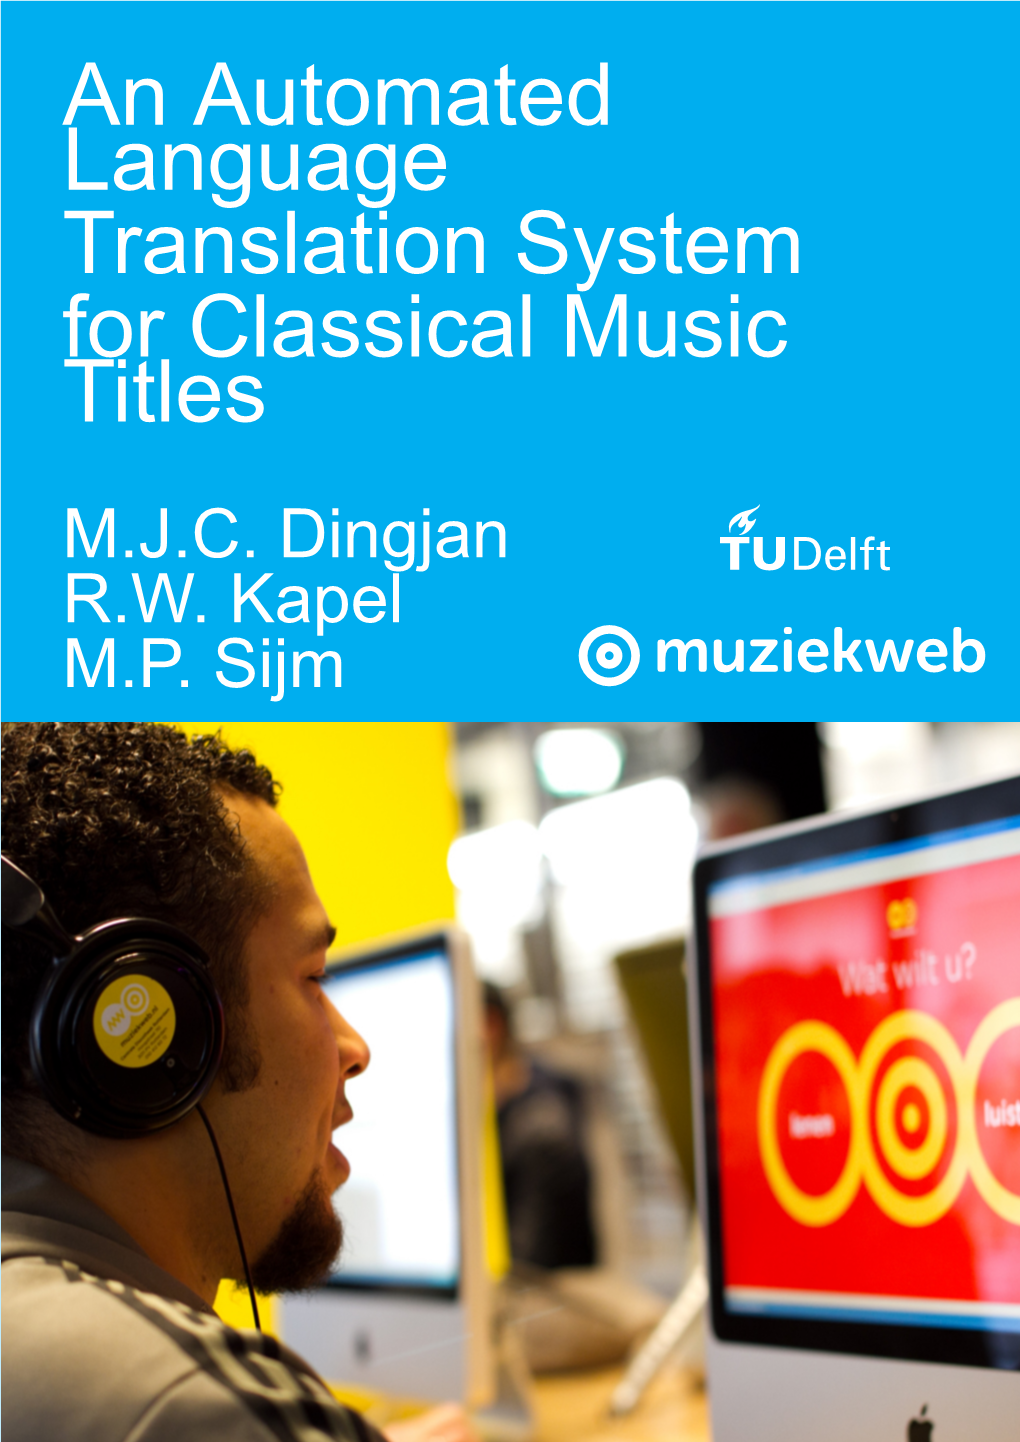 An Automated Language Translation System for Classical Music Titles M.J.C